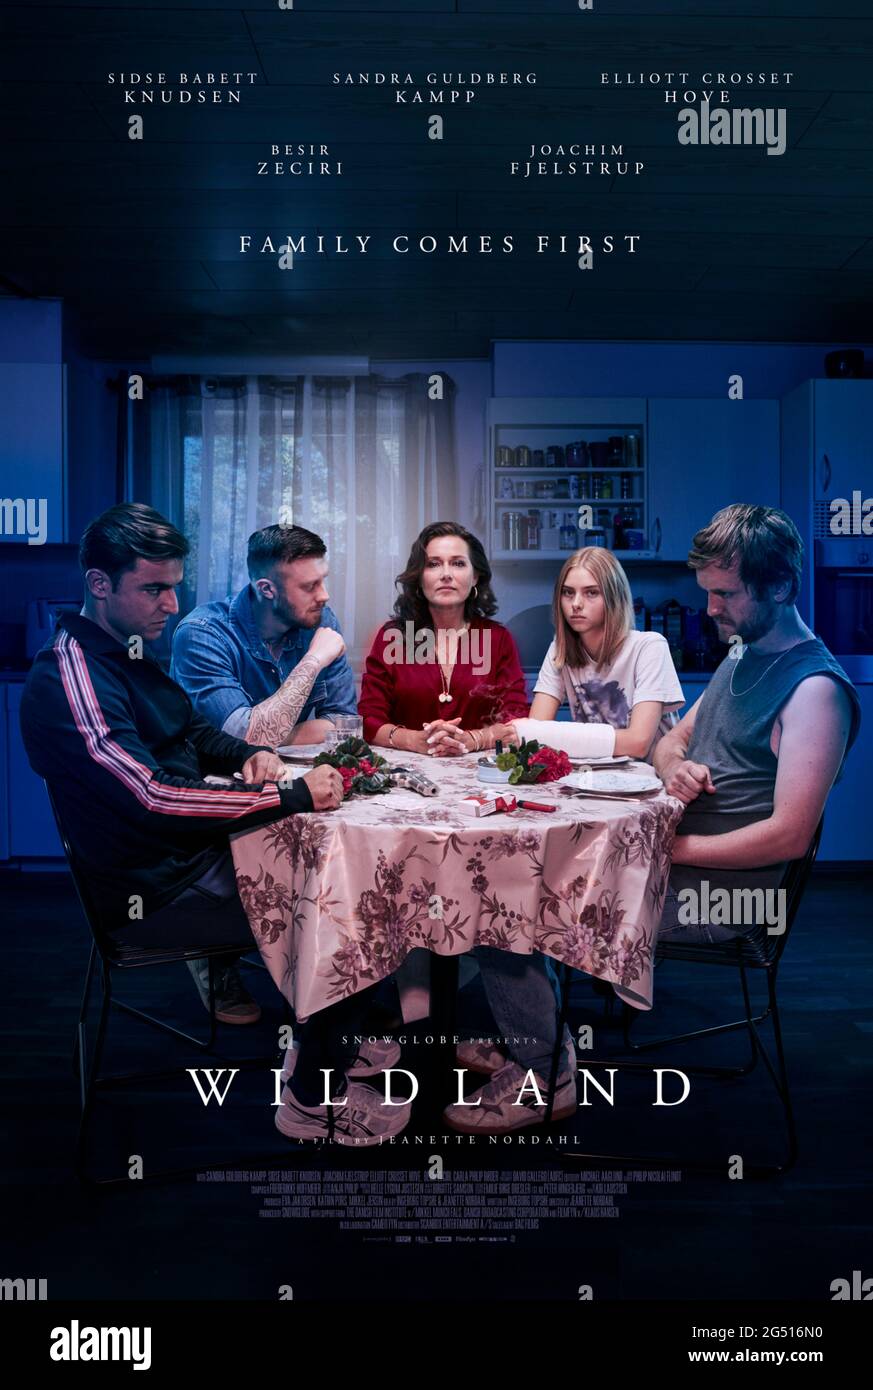 Wildland (2020) directed by Jeanette Nordahl and starring Sandra Guldberg Kampp, Sidse Babett Knudsen and Joachim Fjelstrup. Danish drama about a 17 year old girl who moves in with relatives after the death of her mother and discovers they lead a violent criminal life. Stock Photo